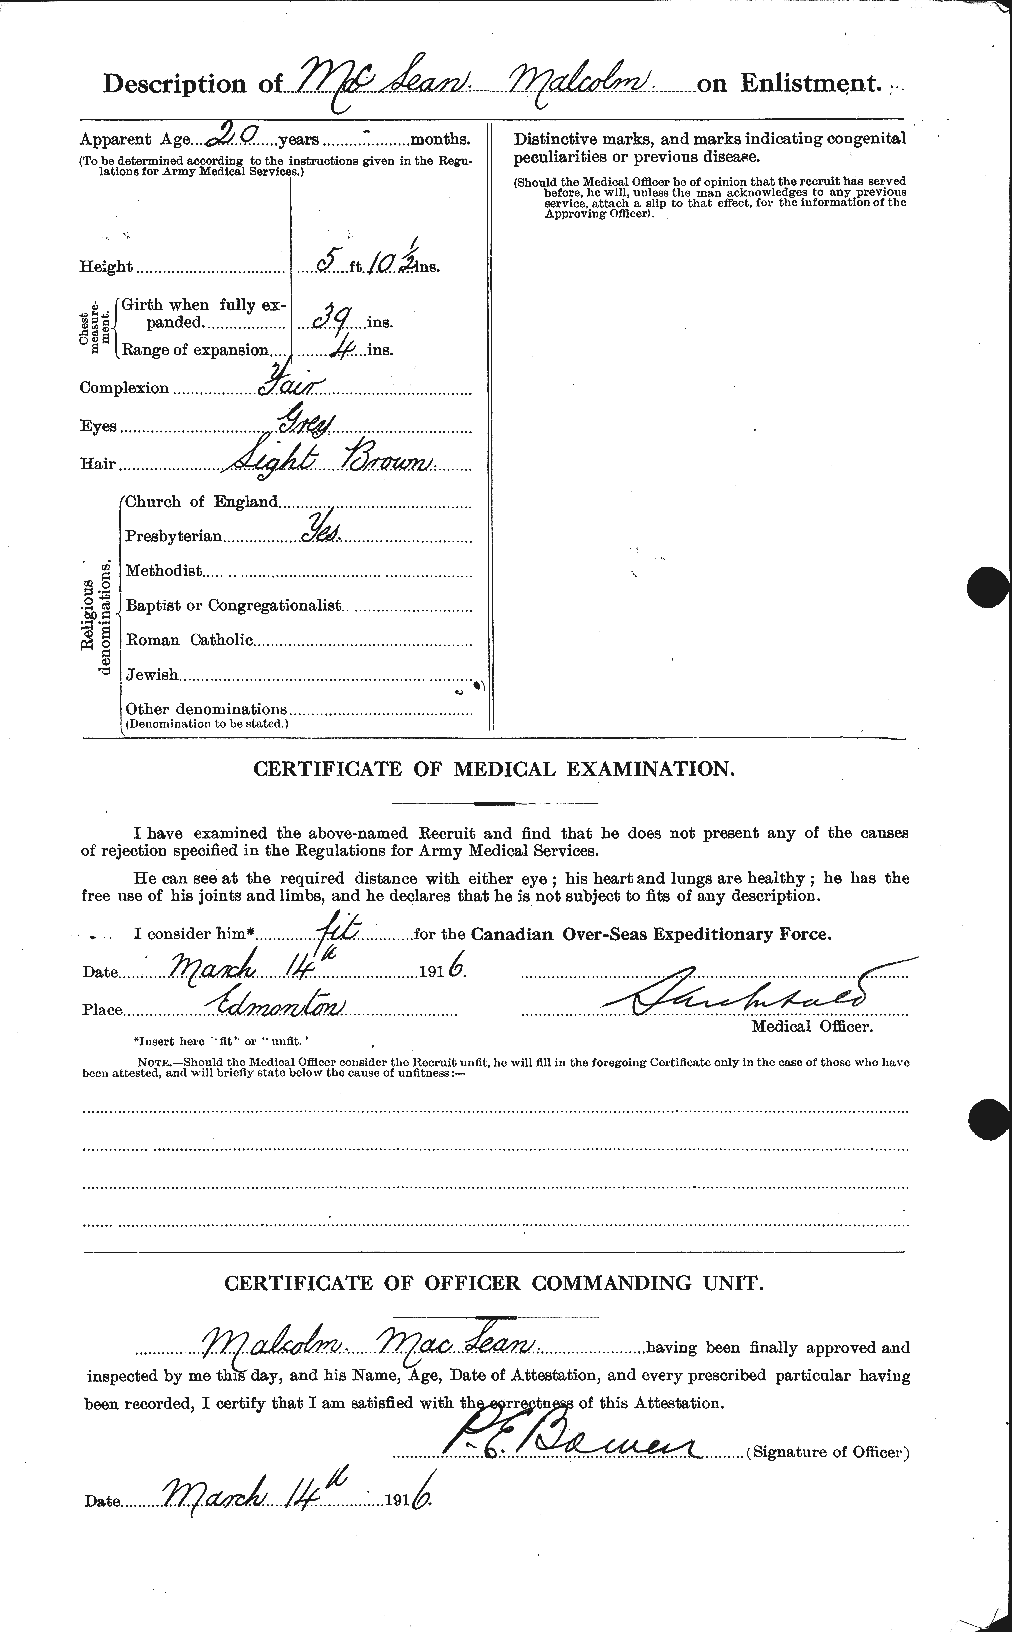 Personnel Records of the First World War - CEF 533308b